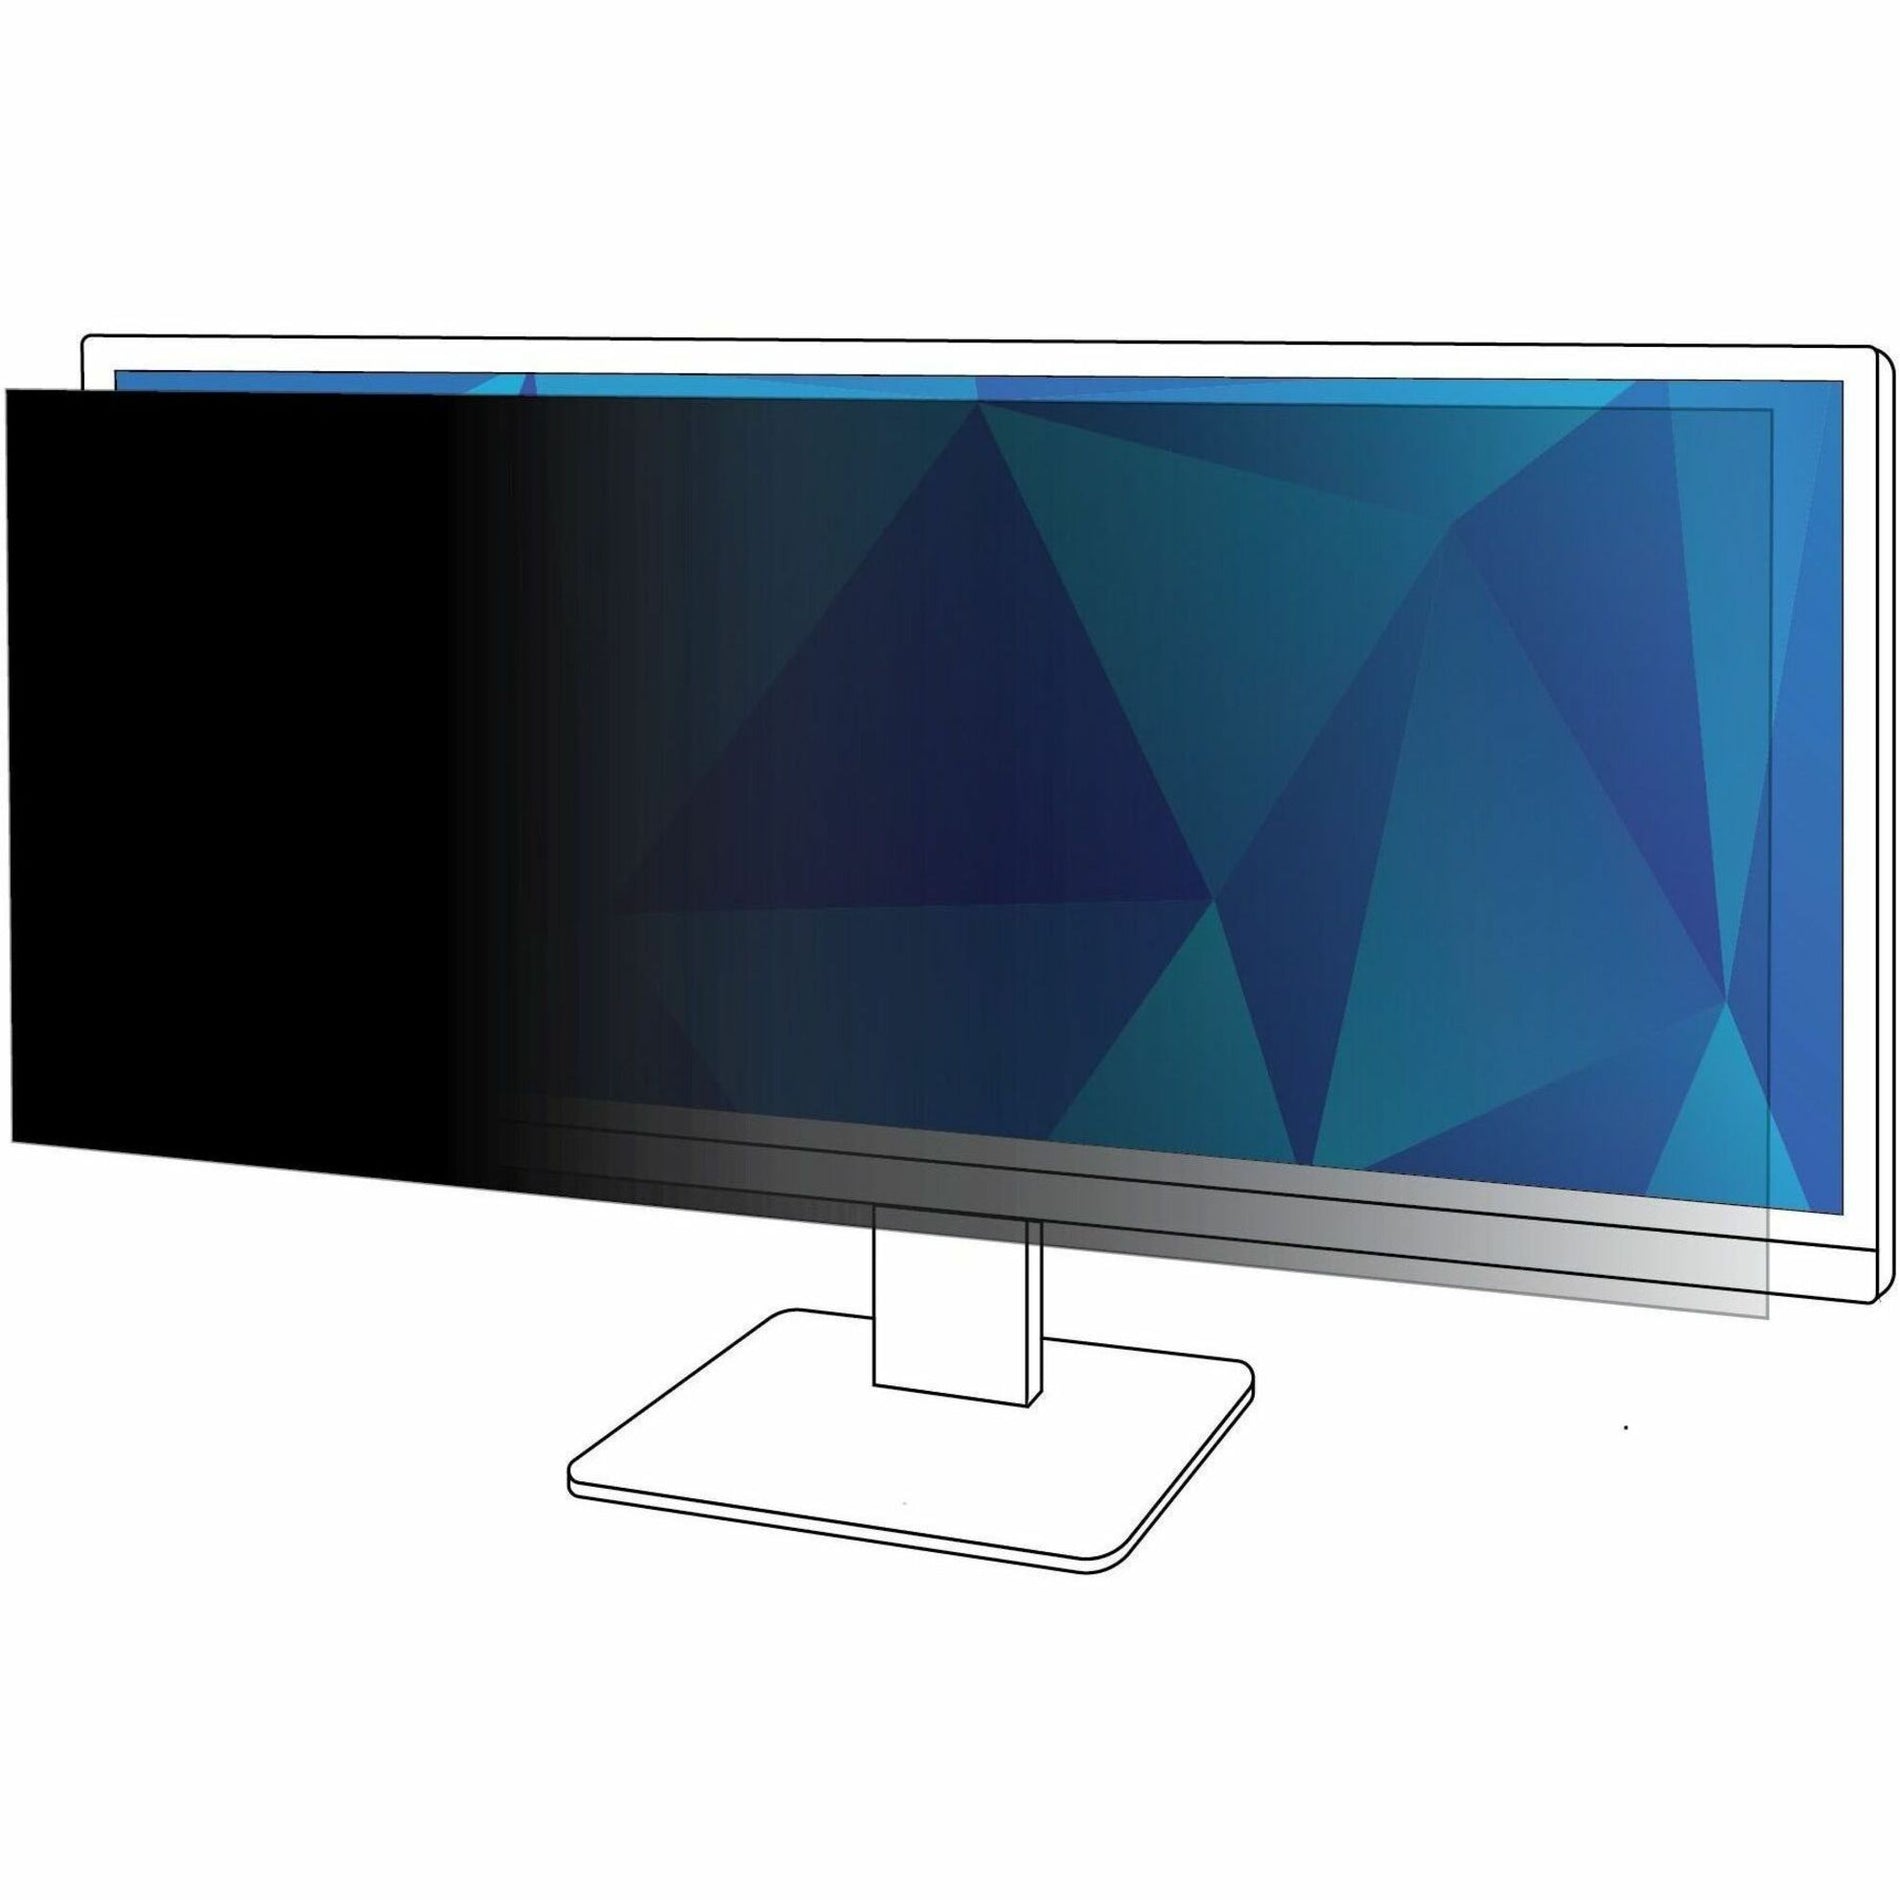 3M PF380W2B Privacy Filter Black Matte, Reversible Glossy-to-Anti-glare, Blue Light Reduction, Limited Viewing Angle, Crystal Clear Image, 1 Year Warranty